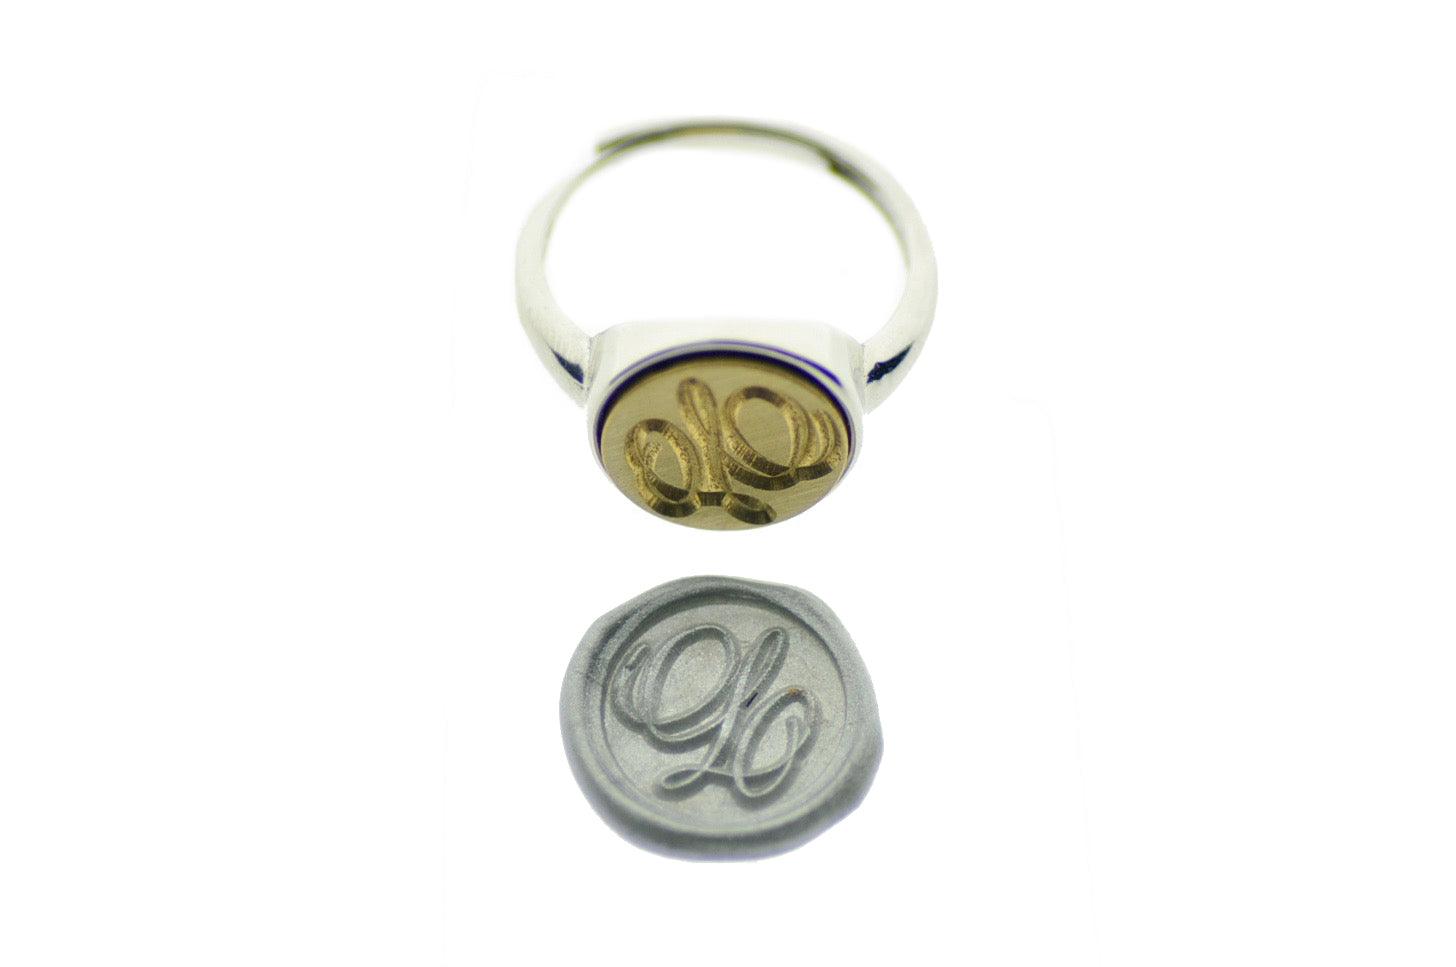 Suzanne Cunningham Calligraphy Initial Signet Ring - Backtozero B20 - 12m, 12mm, 12mm ring, 12mn, 1initial, Calligraphy, Custom, custom ring, her, Initial, One Initial, Personalized, ring, signet ring, size 7, size 8, Suzanne Cunningham, wax seal, wax seal ring